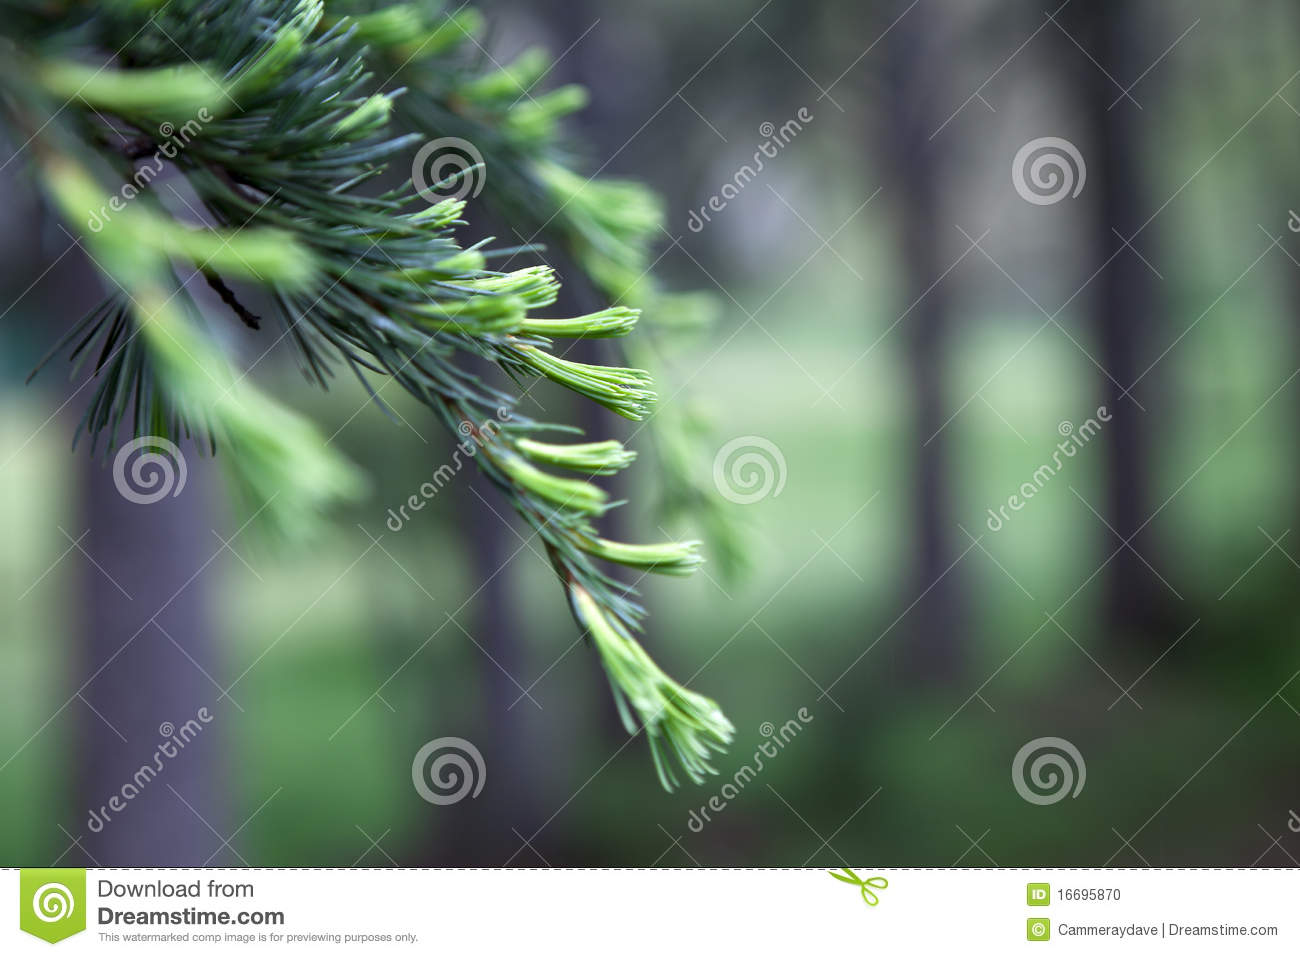 Pine trees with selective focus on one tree branch